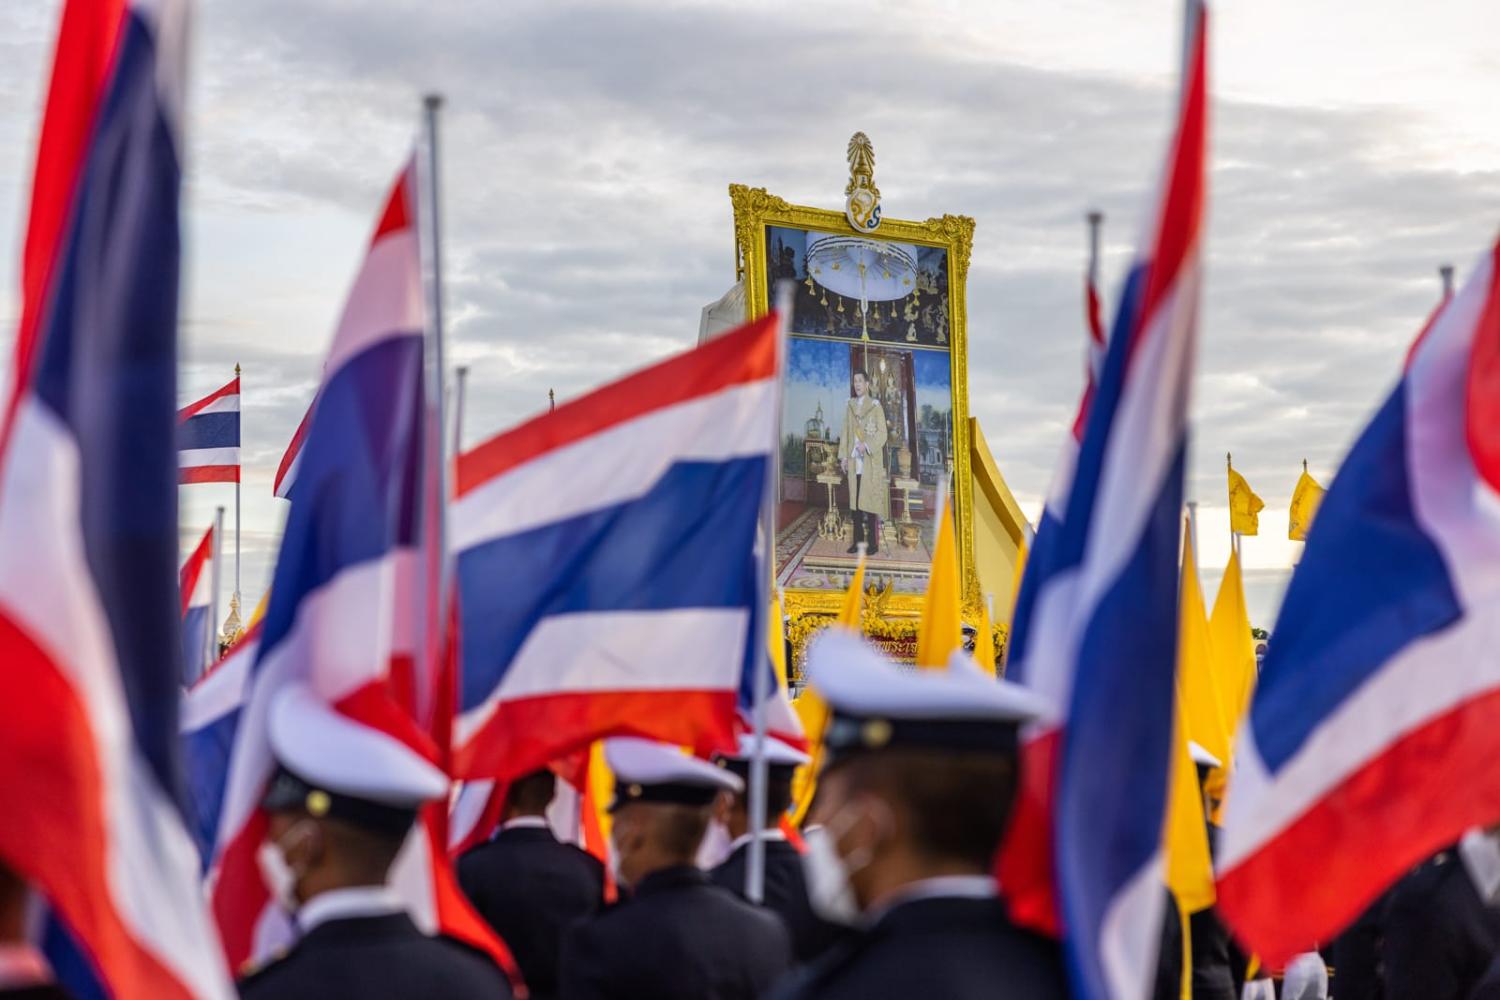 “Nation, Religion, King” still resonates in Thailand today - but not for all (Lauren DeCicca/Getty Images)